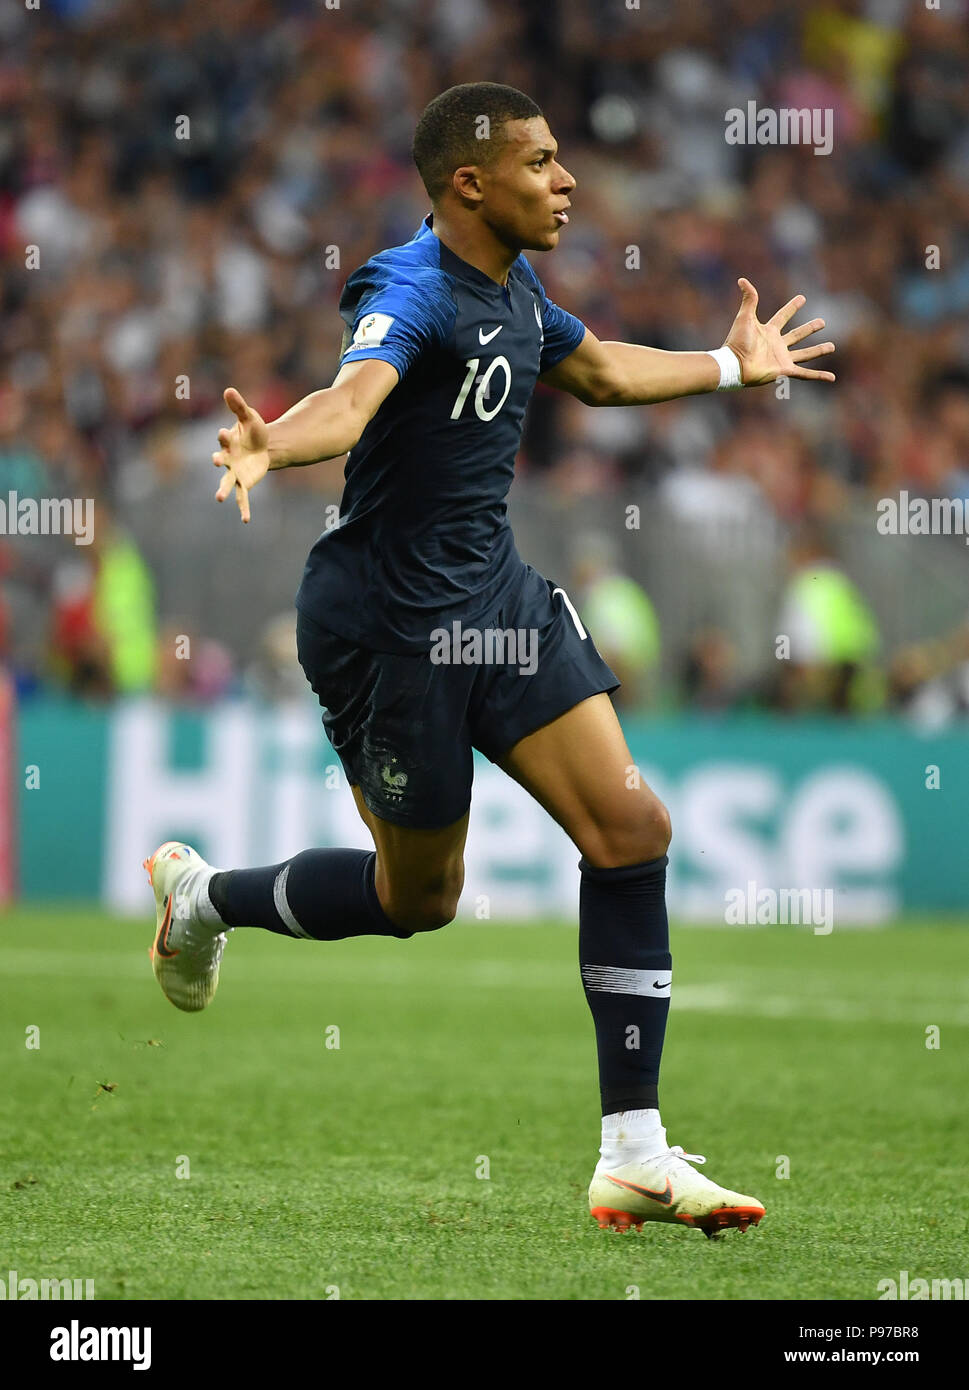 Moscow, Russia. 15th July, 2018. Kylian Mbappe of France celebrates scoring during the 2018 FIFA World Cup final match between France and Croatia in Moscow, Russia, July 15, 2018. Credit: Li Ga/Xinhua/Alamy Live News Stock Photo